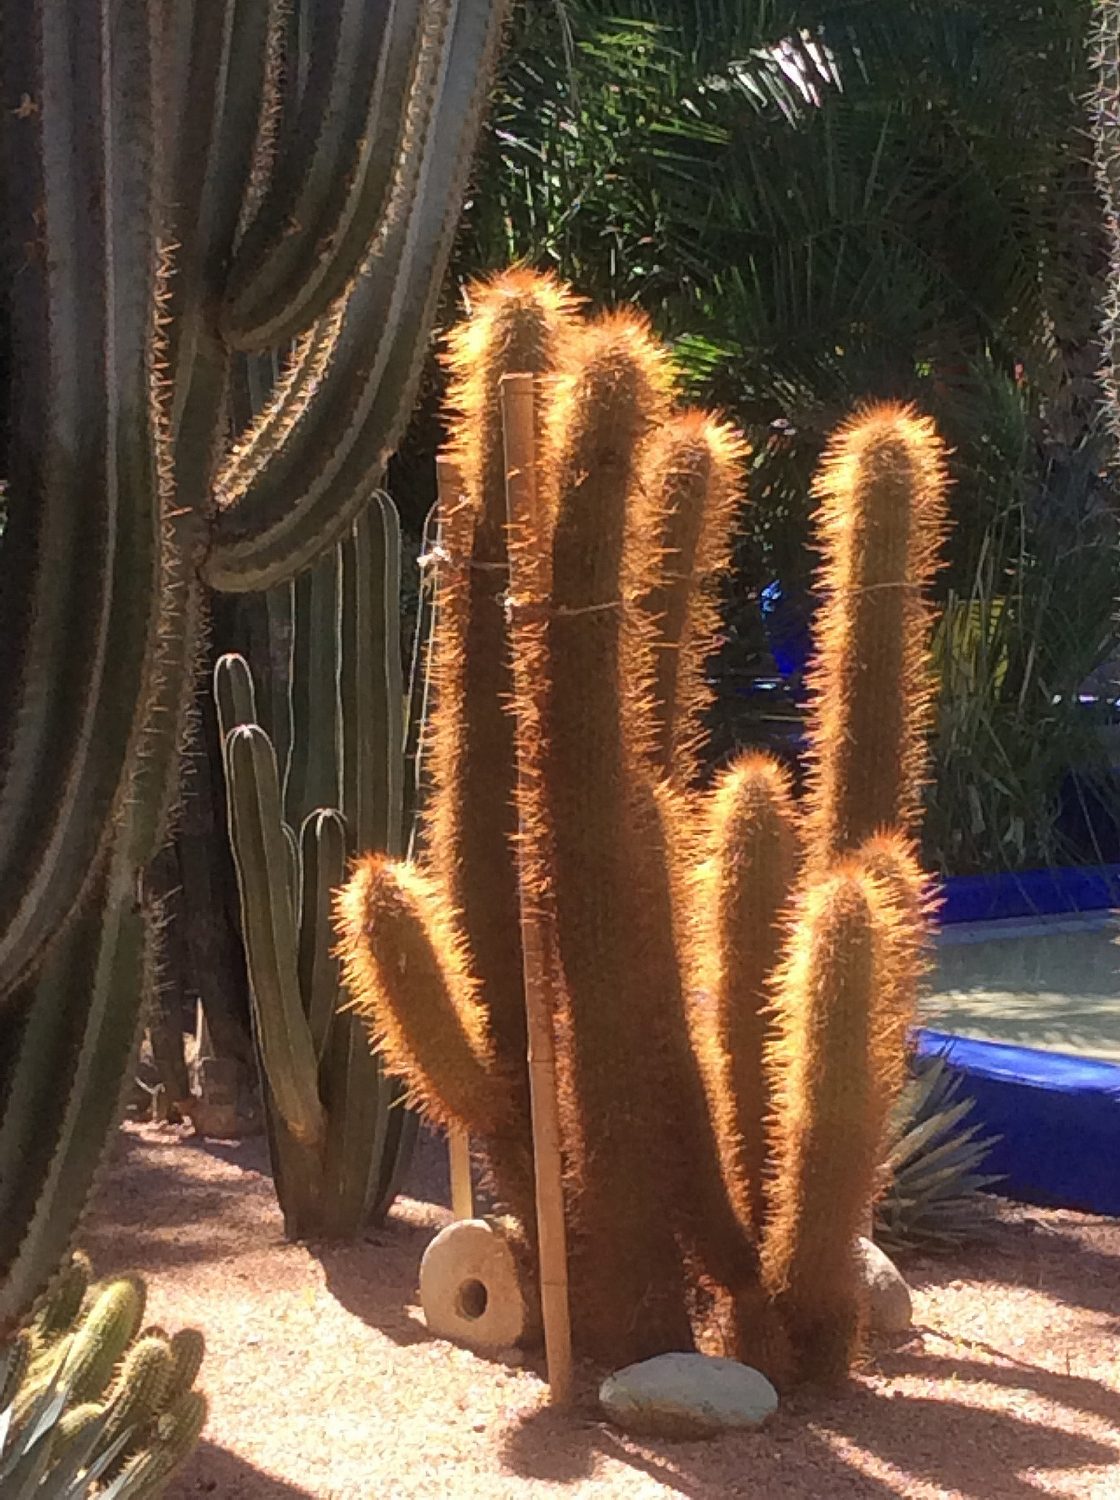 Cacti in the Marjorelle Garden, in Marrakech, restored by Yves Saint Laurent and Pierre Bergé